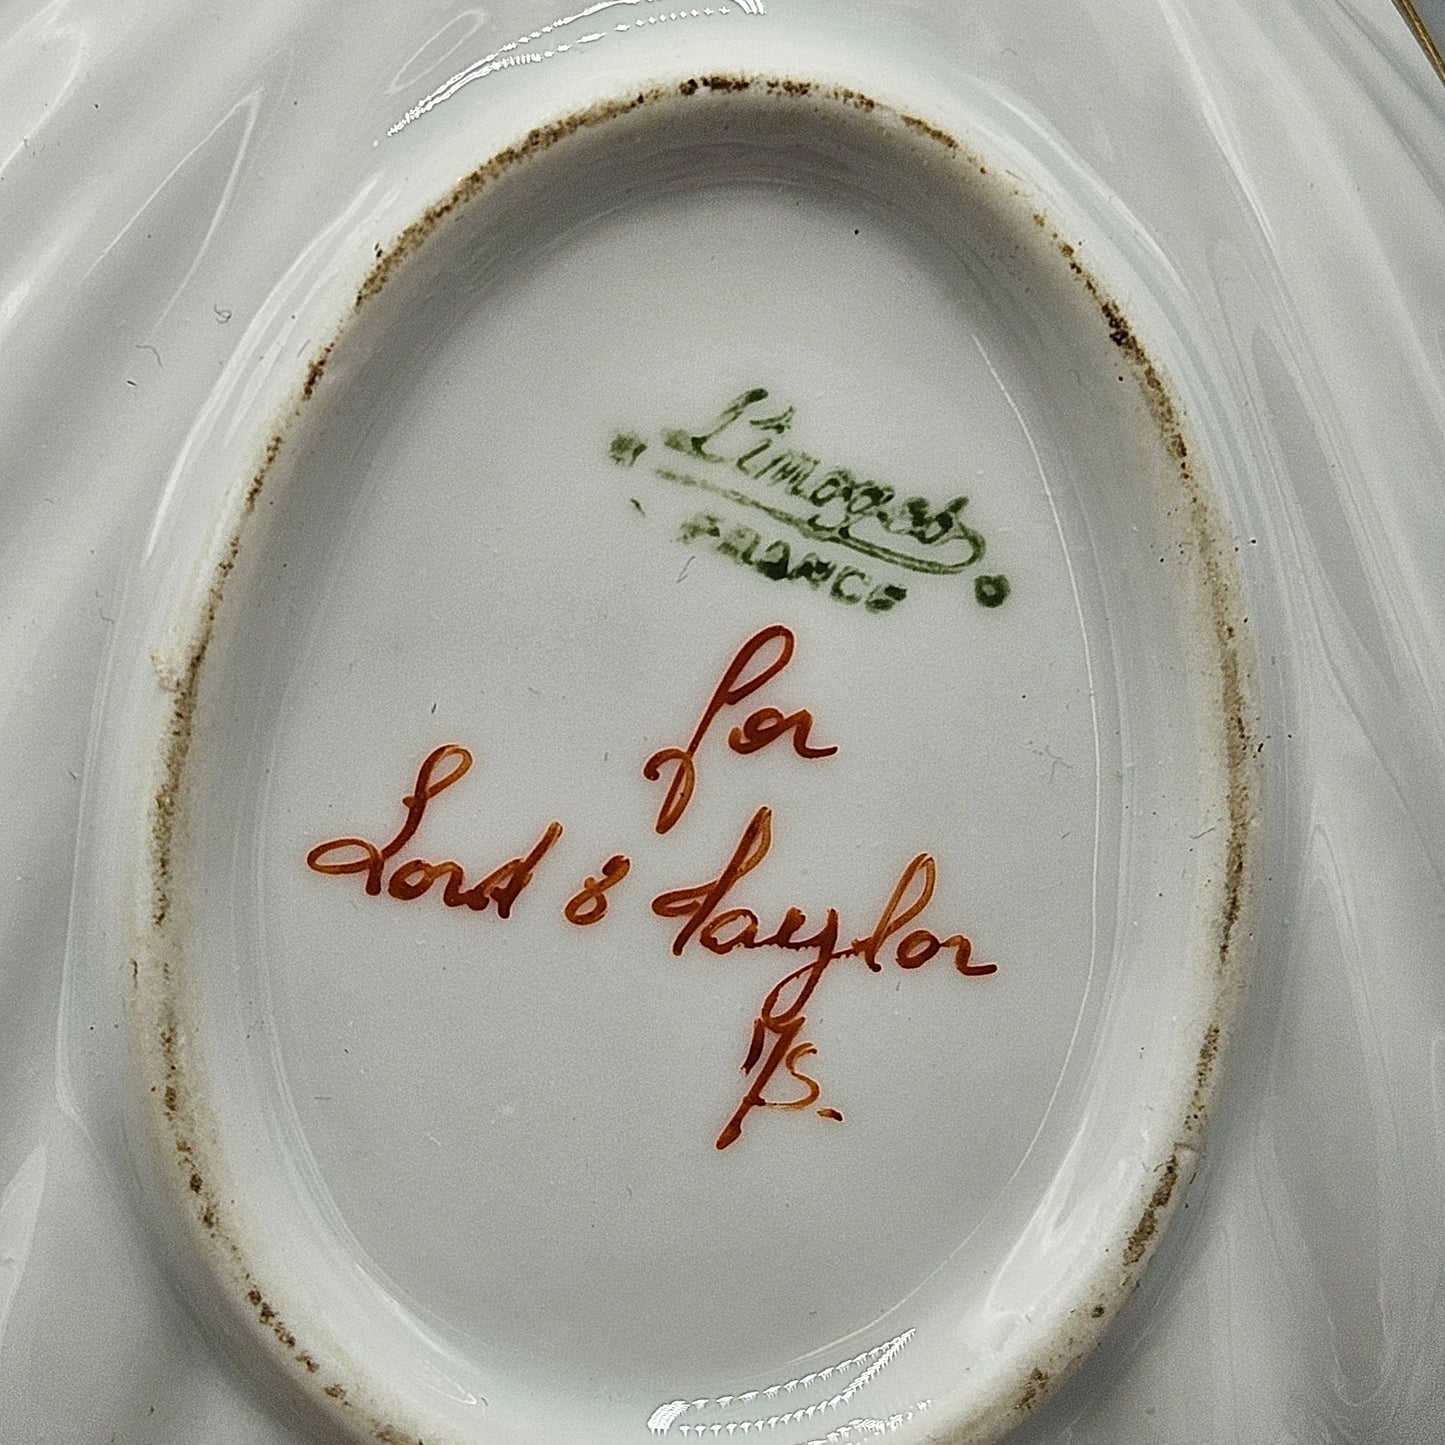 Vintage Limoges for Lord & Taylor Hinged Porcelain Clam Shell Trinket Box